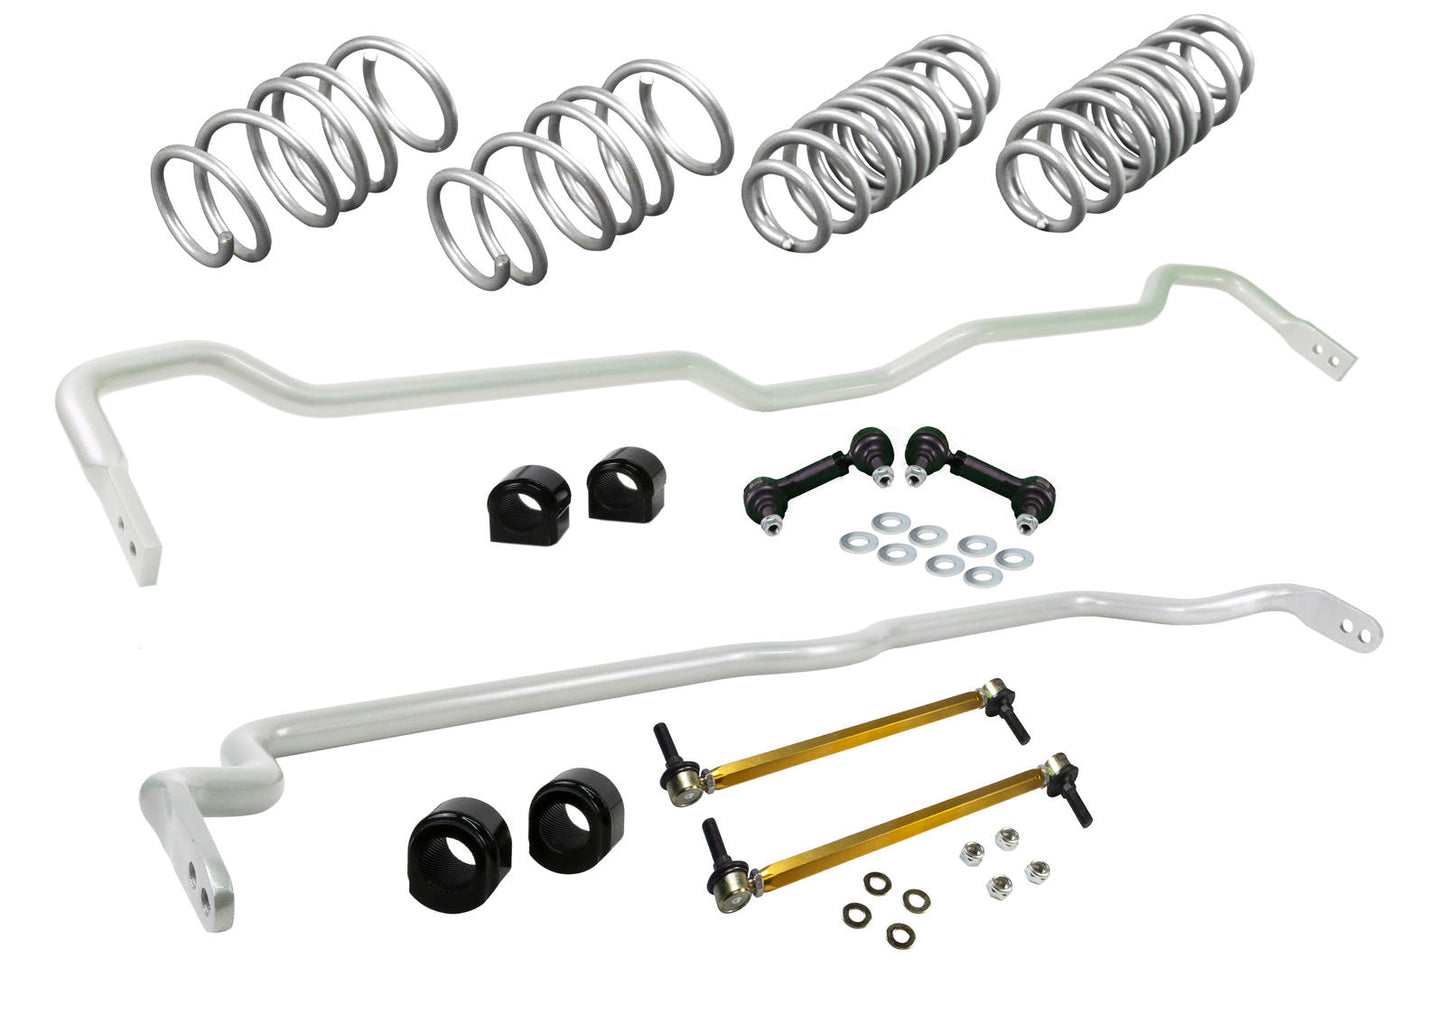 Whiteline Grip Series 1 Anti-Roll Bar And Lowering Spring Vehicle Kit Mercedes A45 AMG W176 2013-2019 Image 1